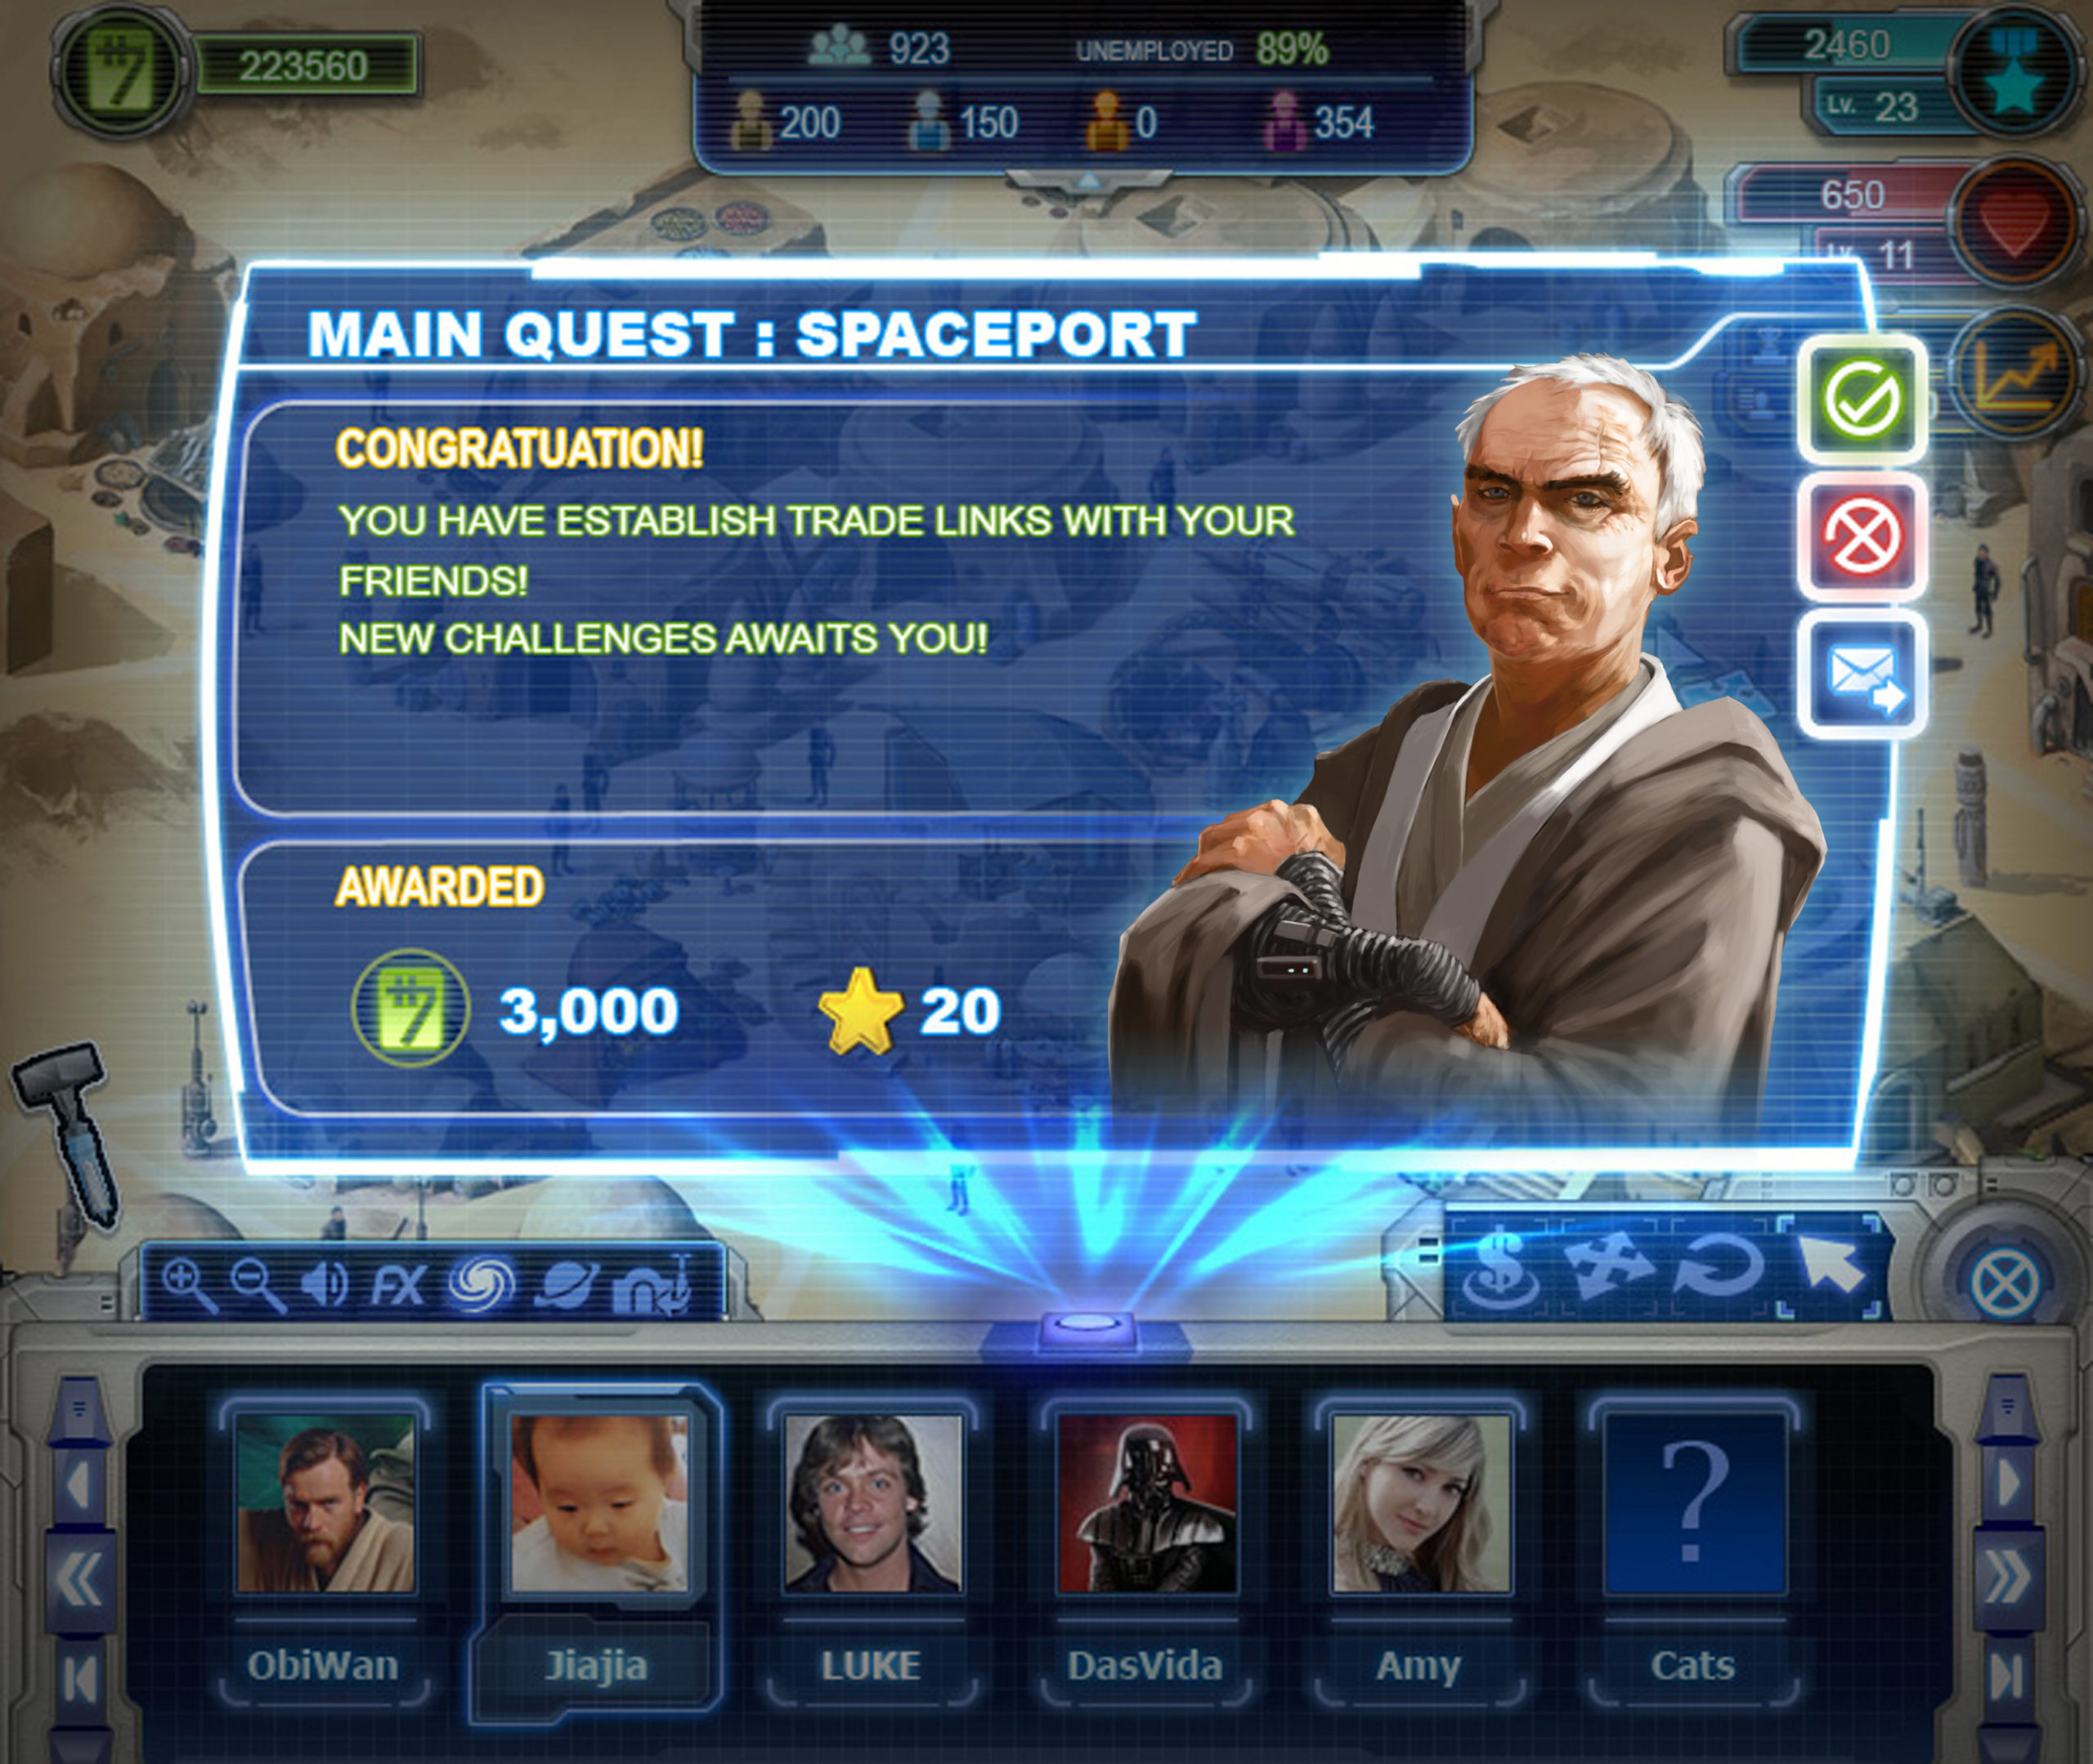 Star Wars Outpost, A Cancelled LucasArts Game, Looked Way Better Than FarmVille 